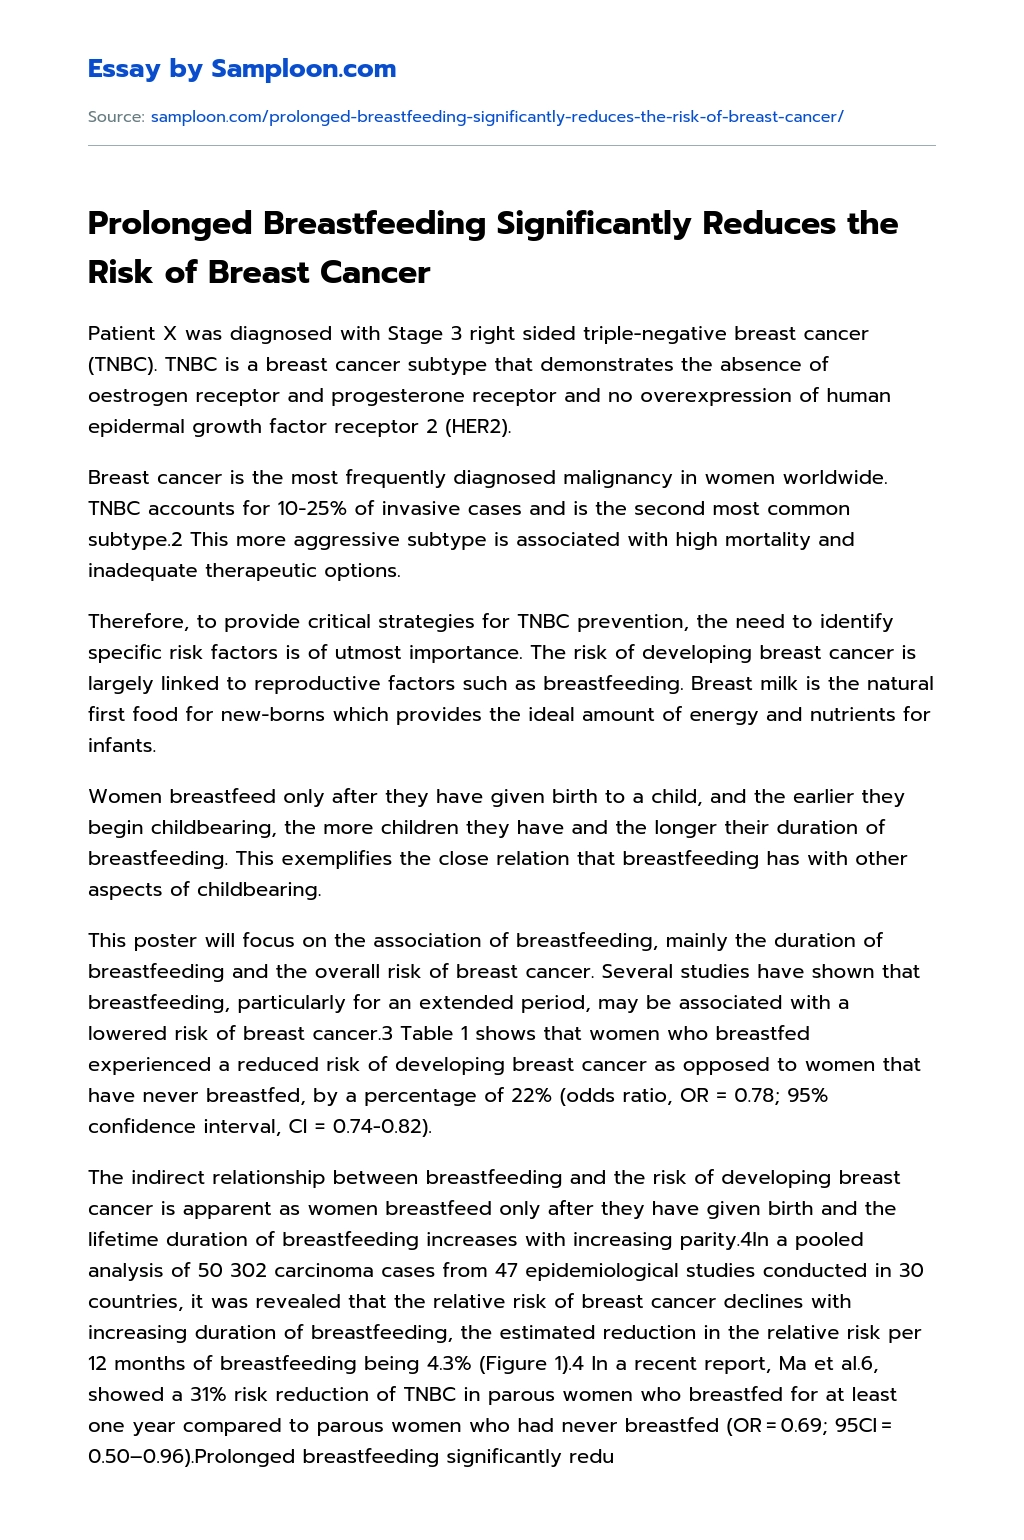 Prolonged Breastfeeding Significantly Reduces the Risk of Breast Cancer essay